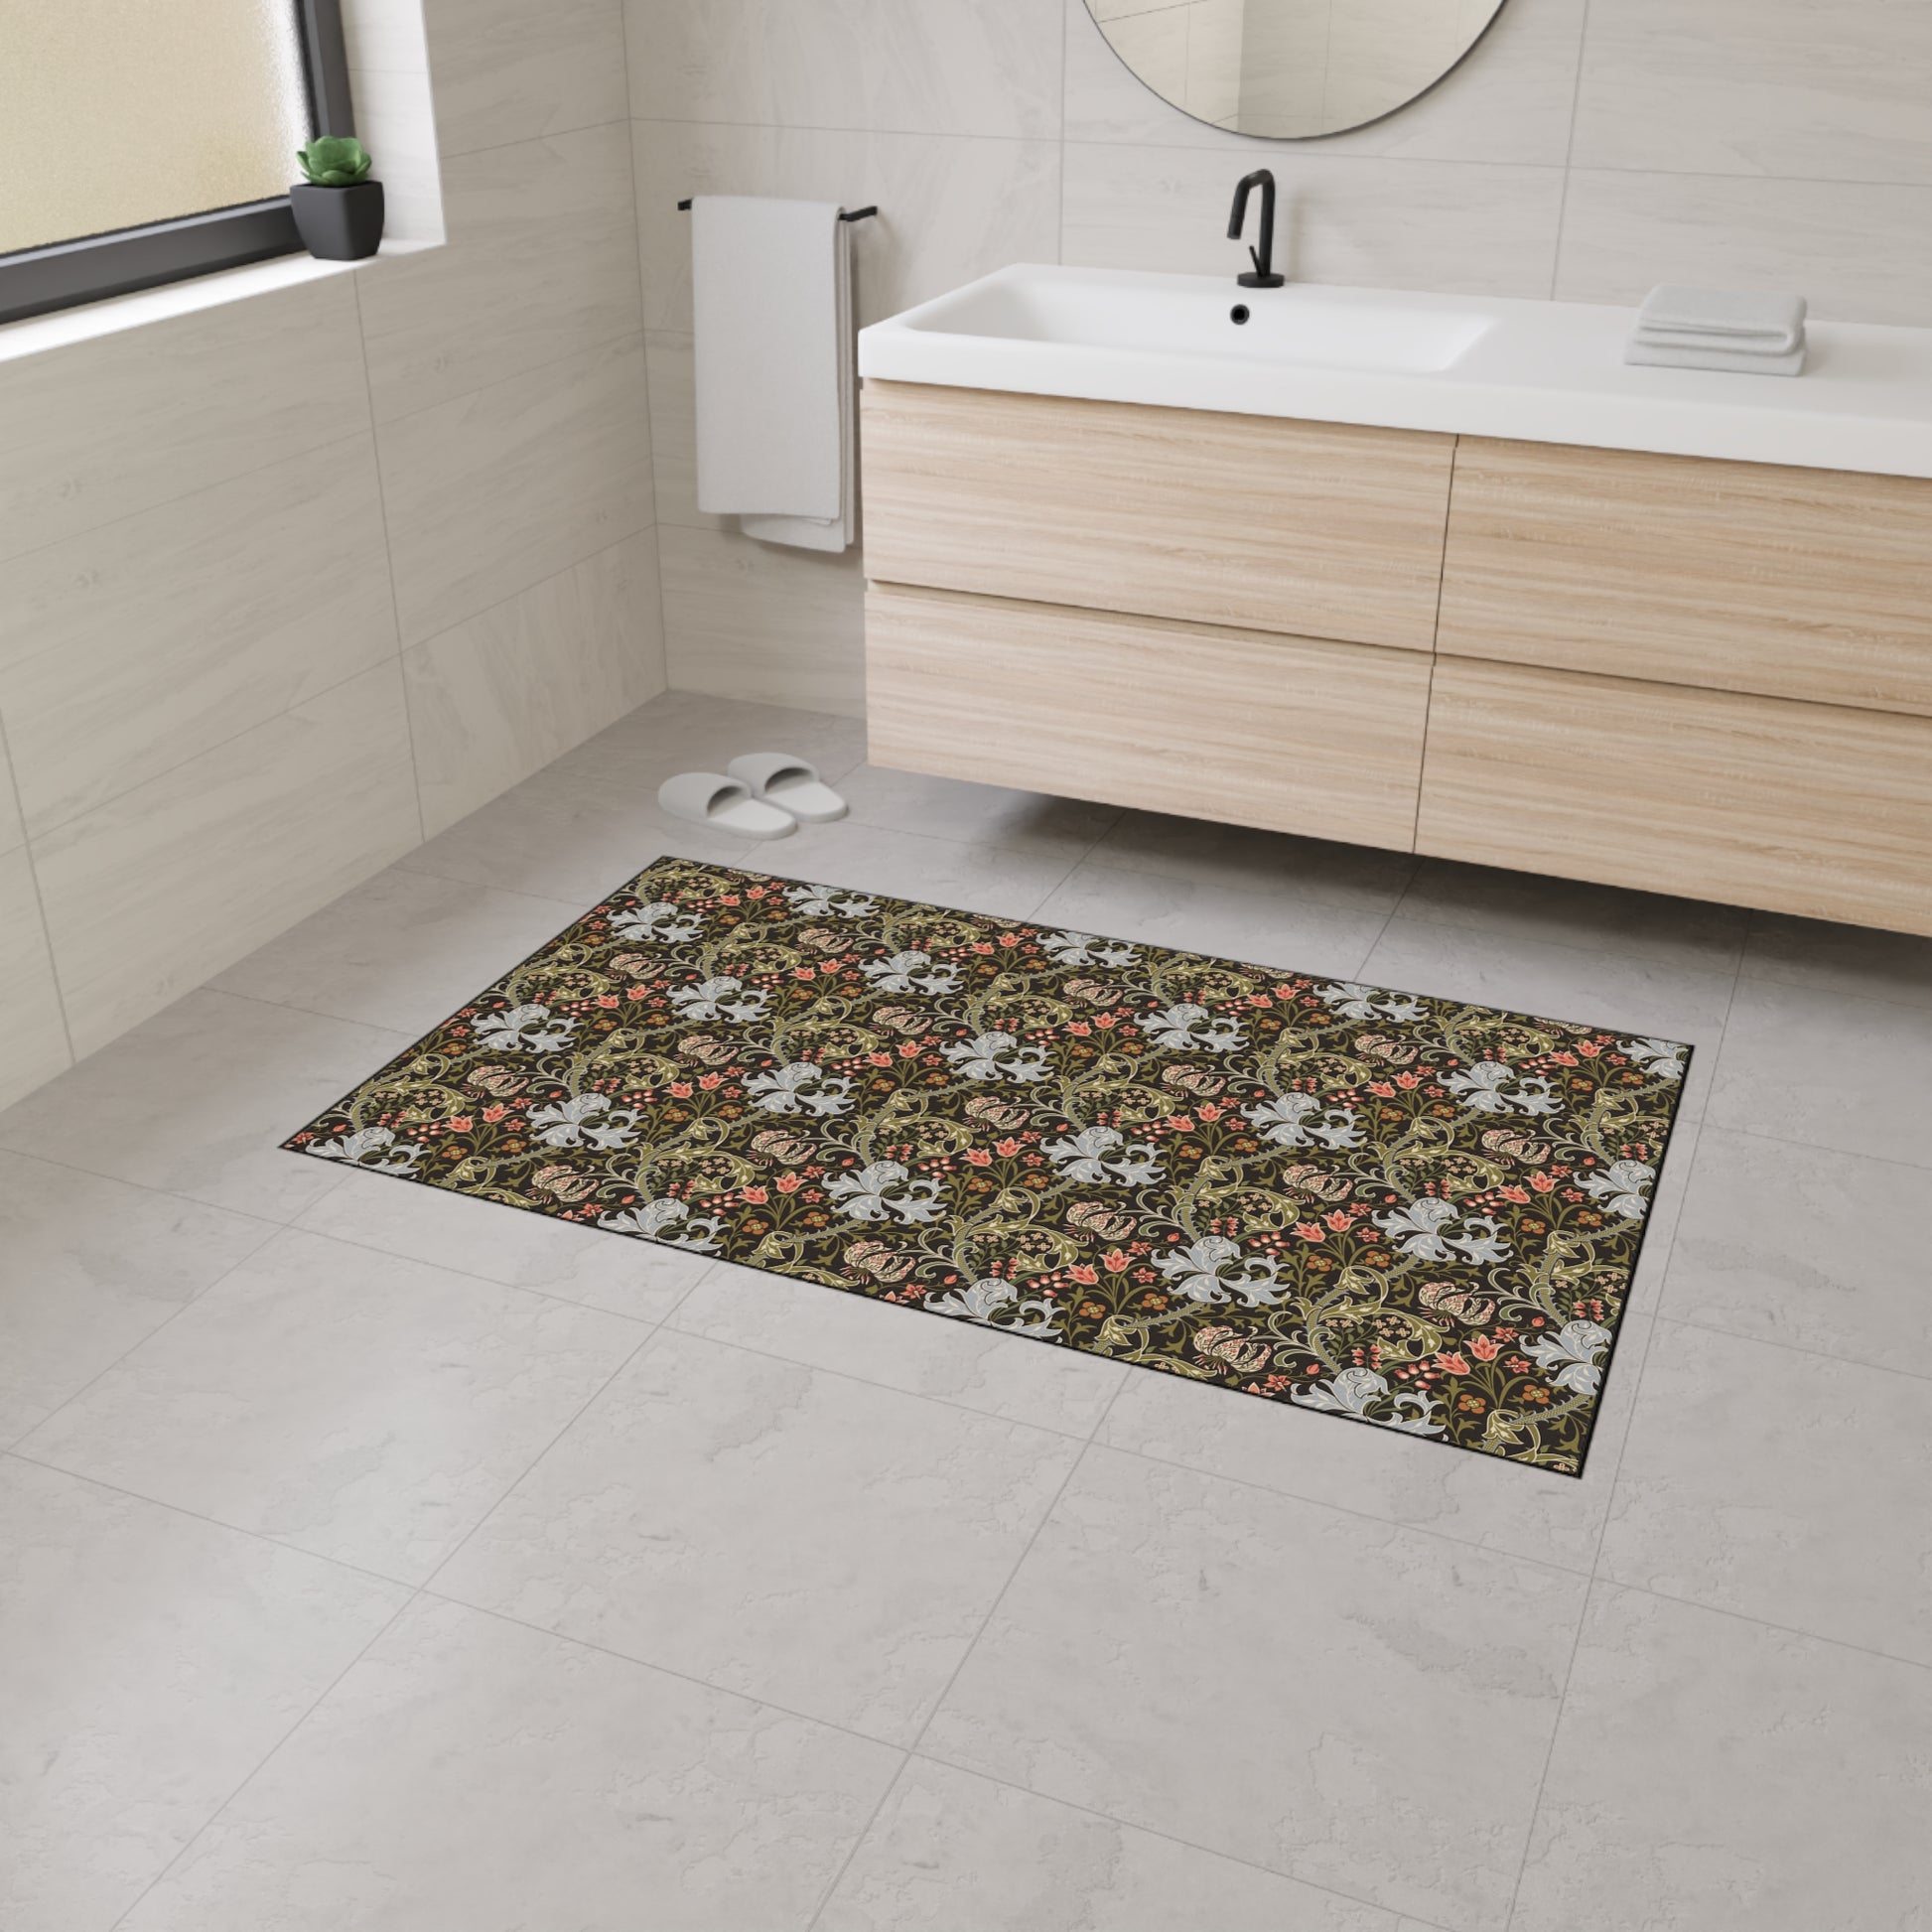 william-morris-co-heavy-duty-floor-mat-golden-lily-collection-midnight-16